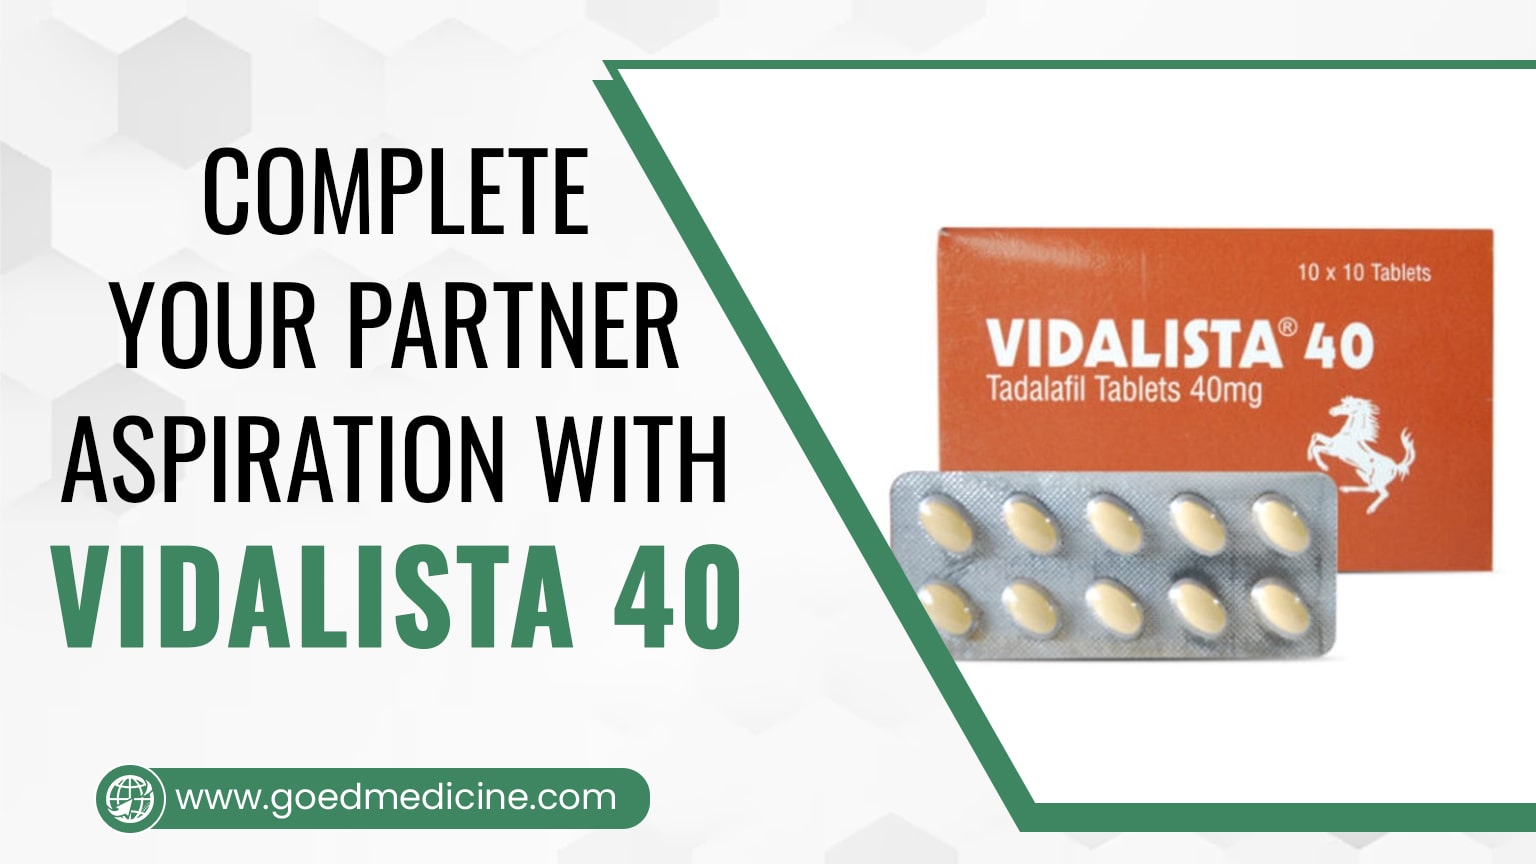 Complete Your Partner Aspiration with Vidalista 40